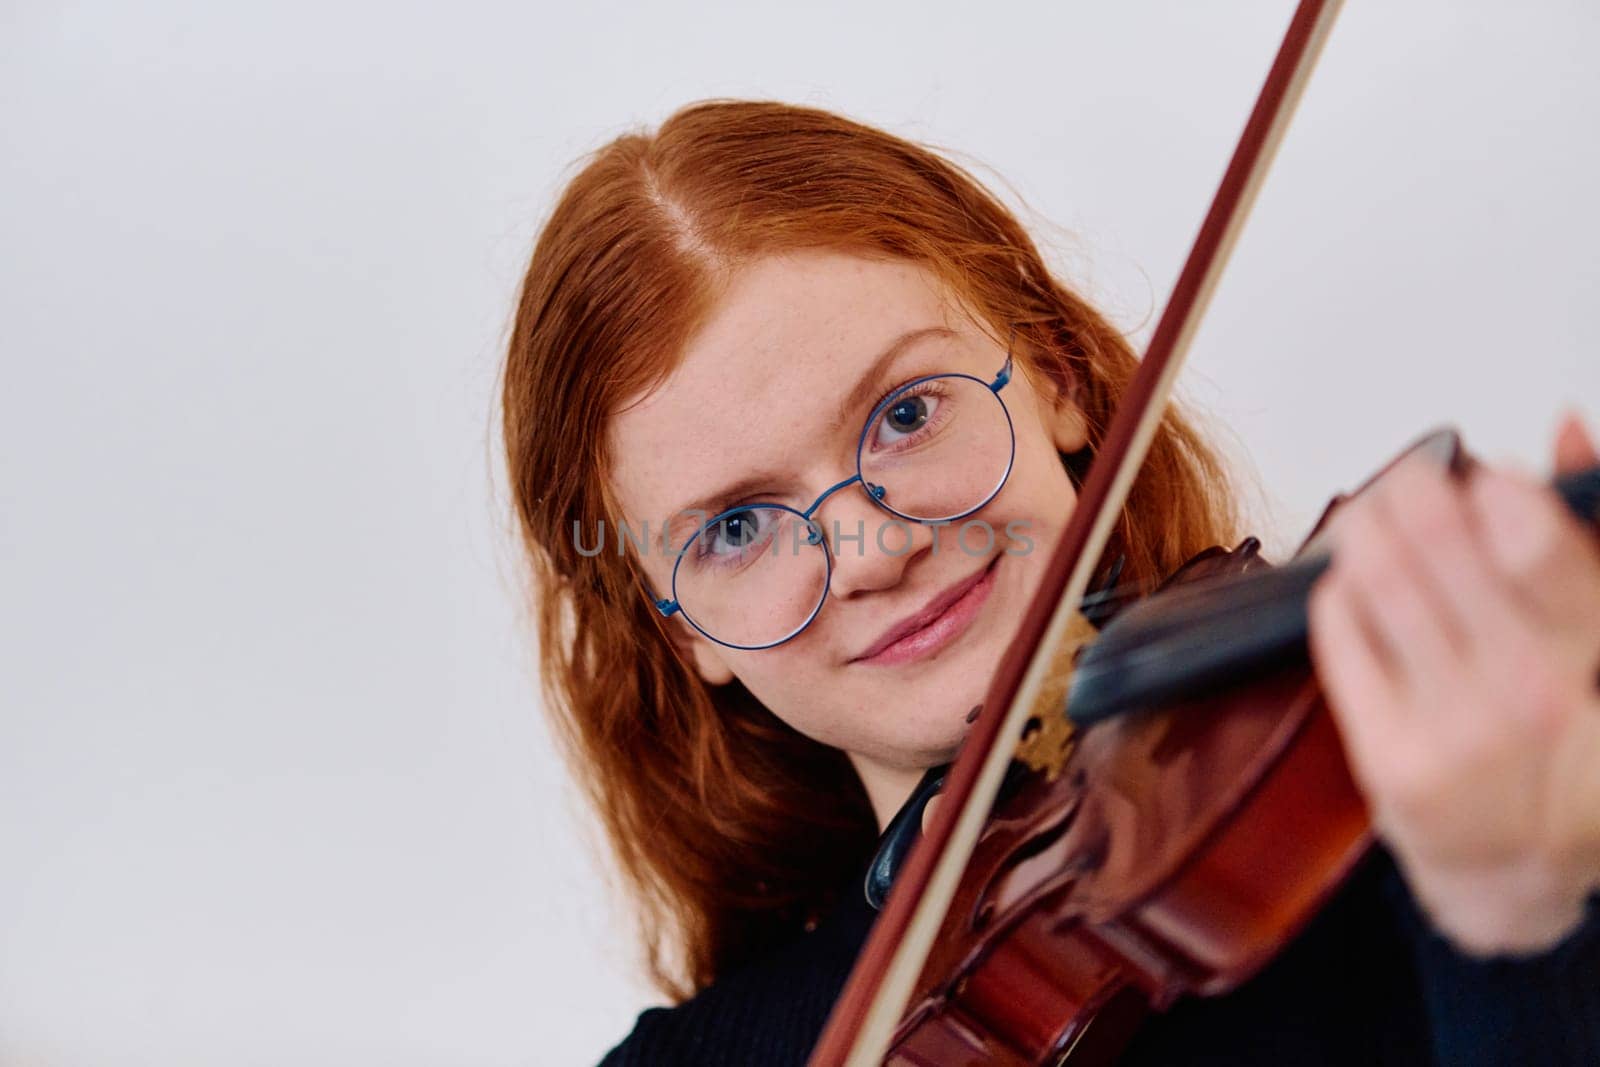 Stunning Redhead Musician Poses with Violin in Captivating Portrait by dotshock